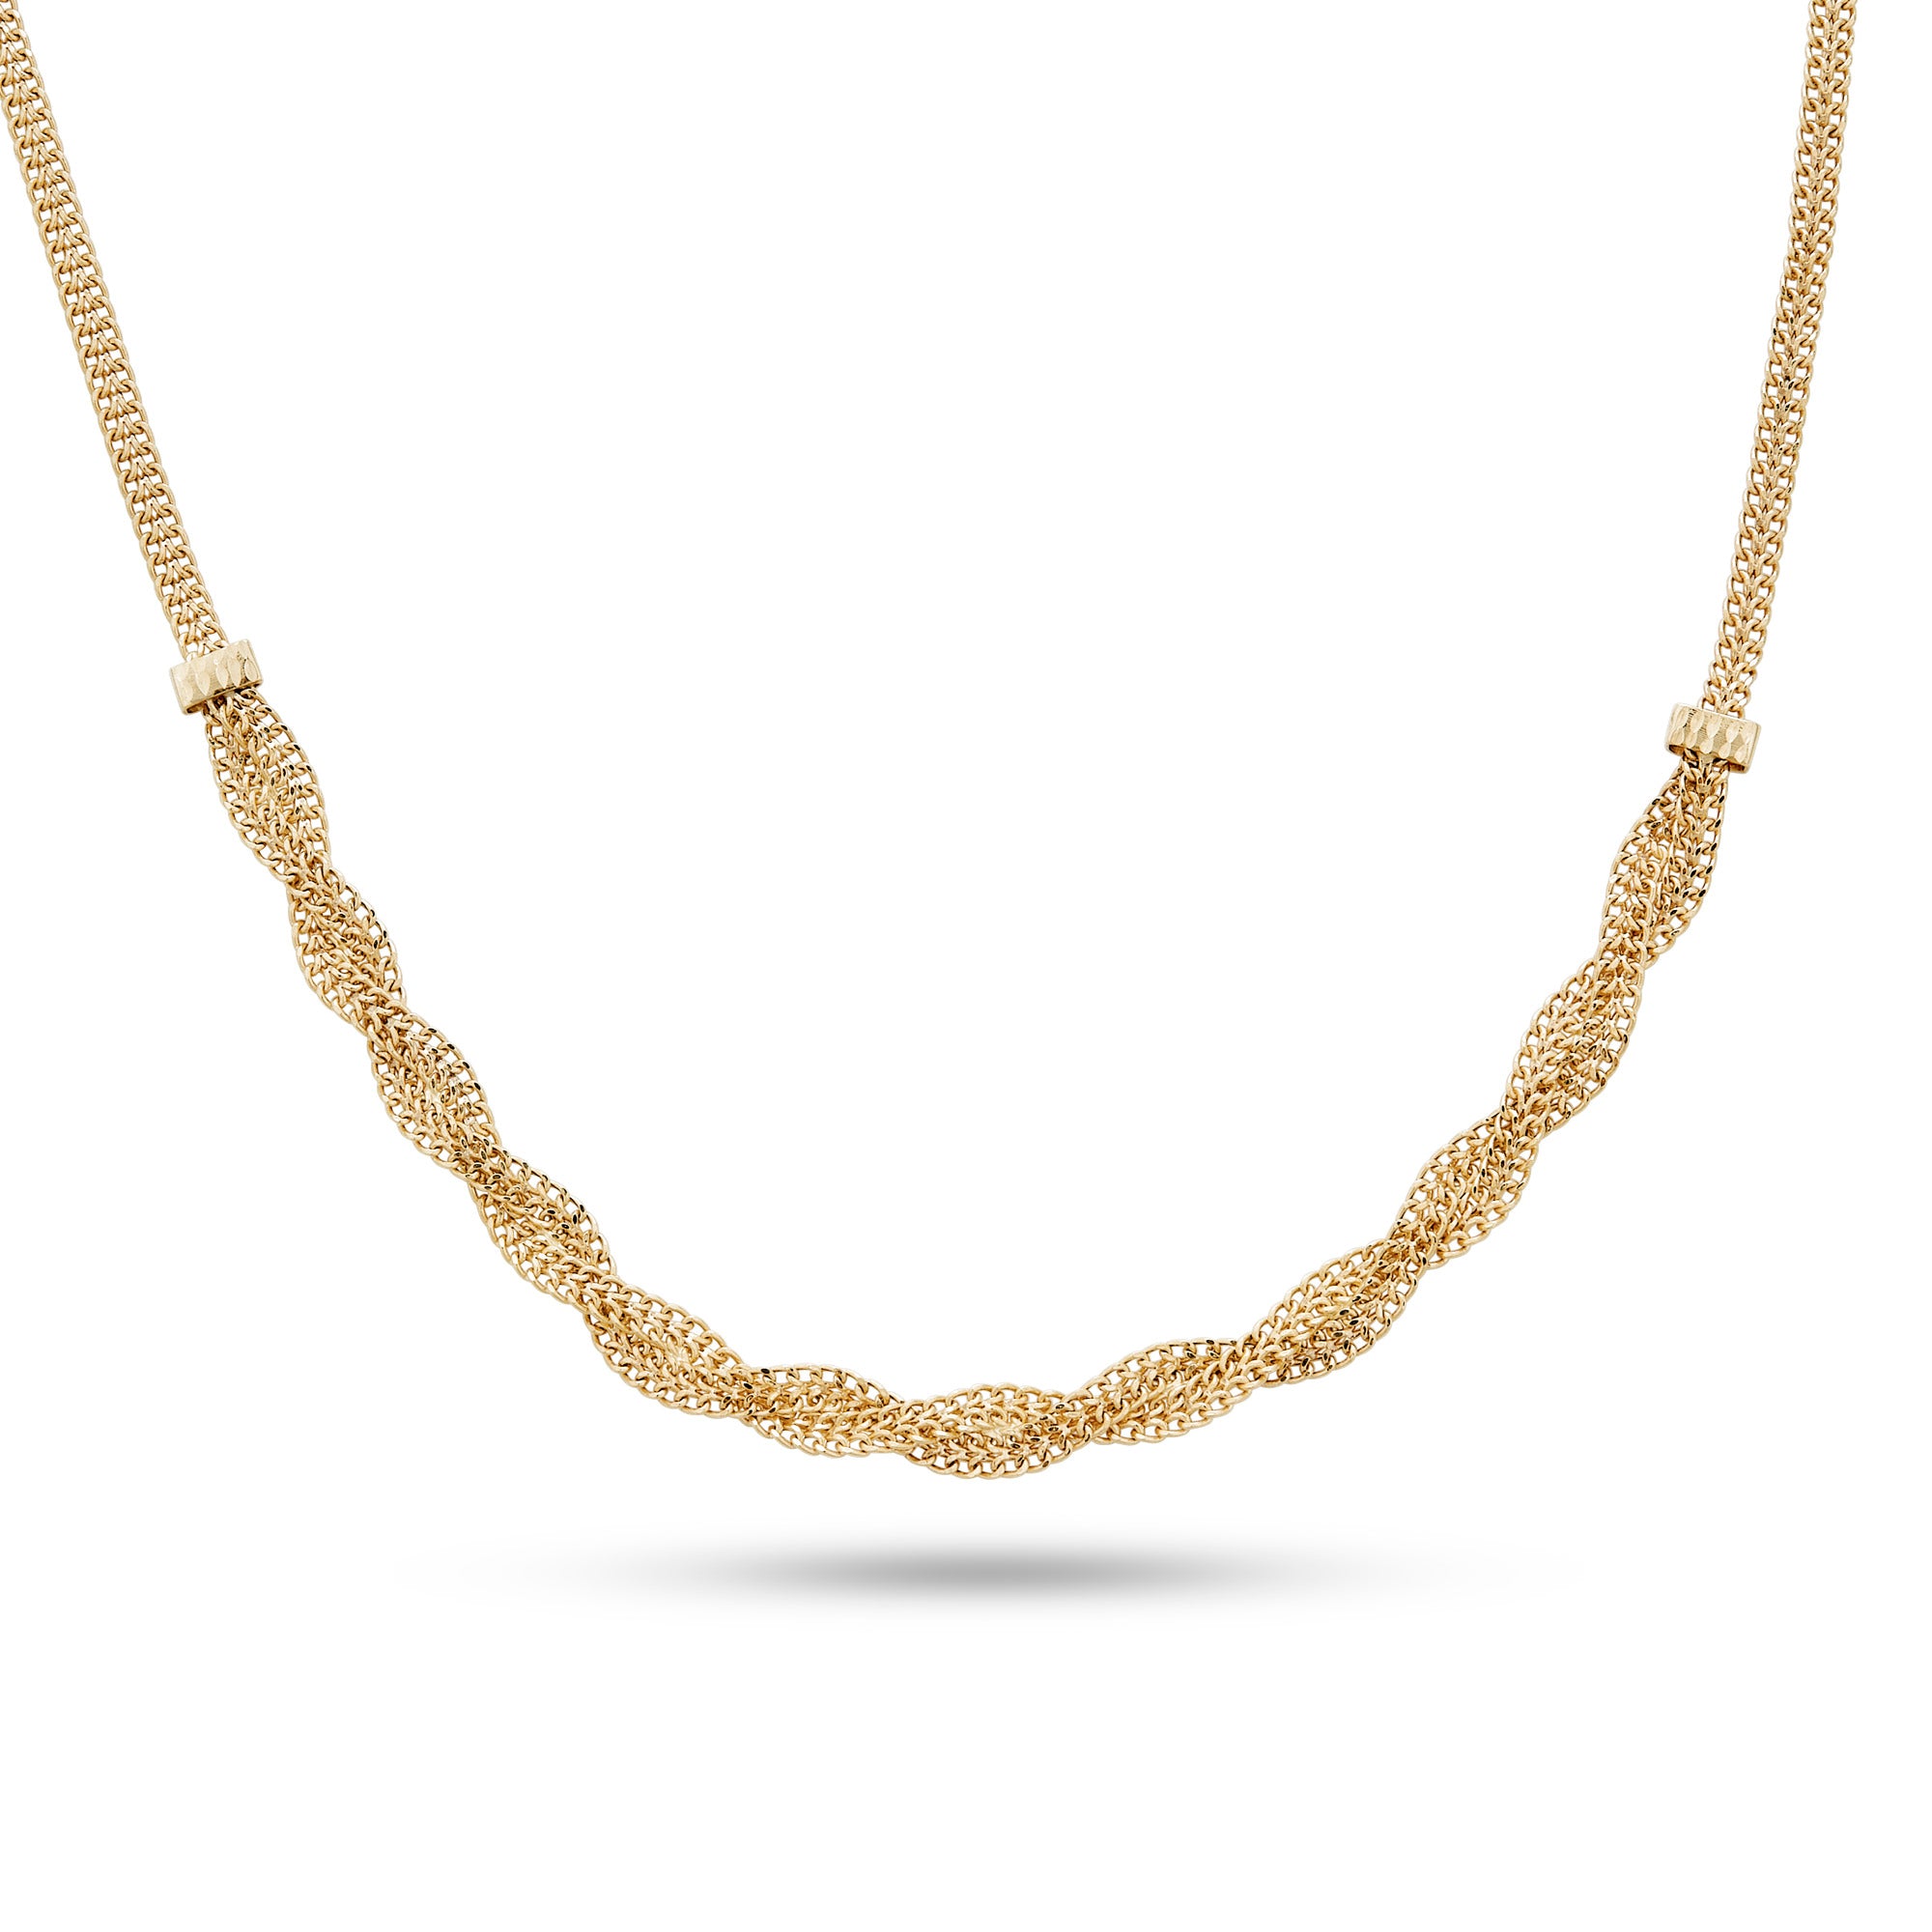 Stone and Strand Gold Ball Chain Necklace